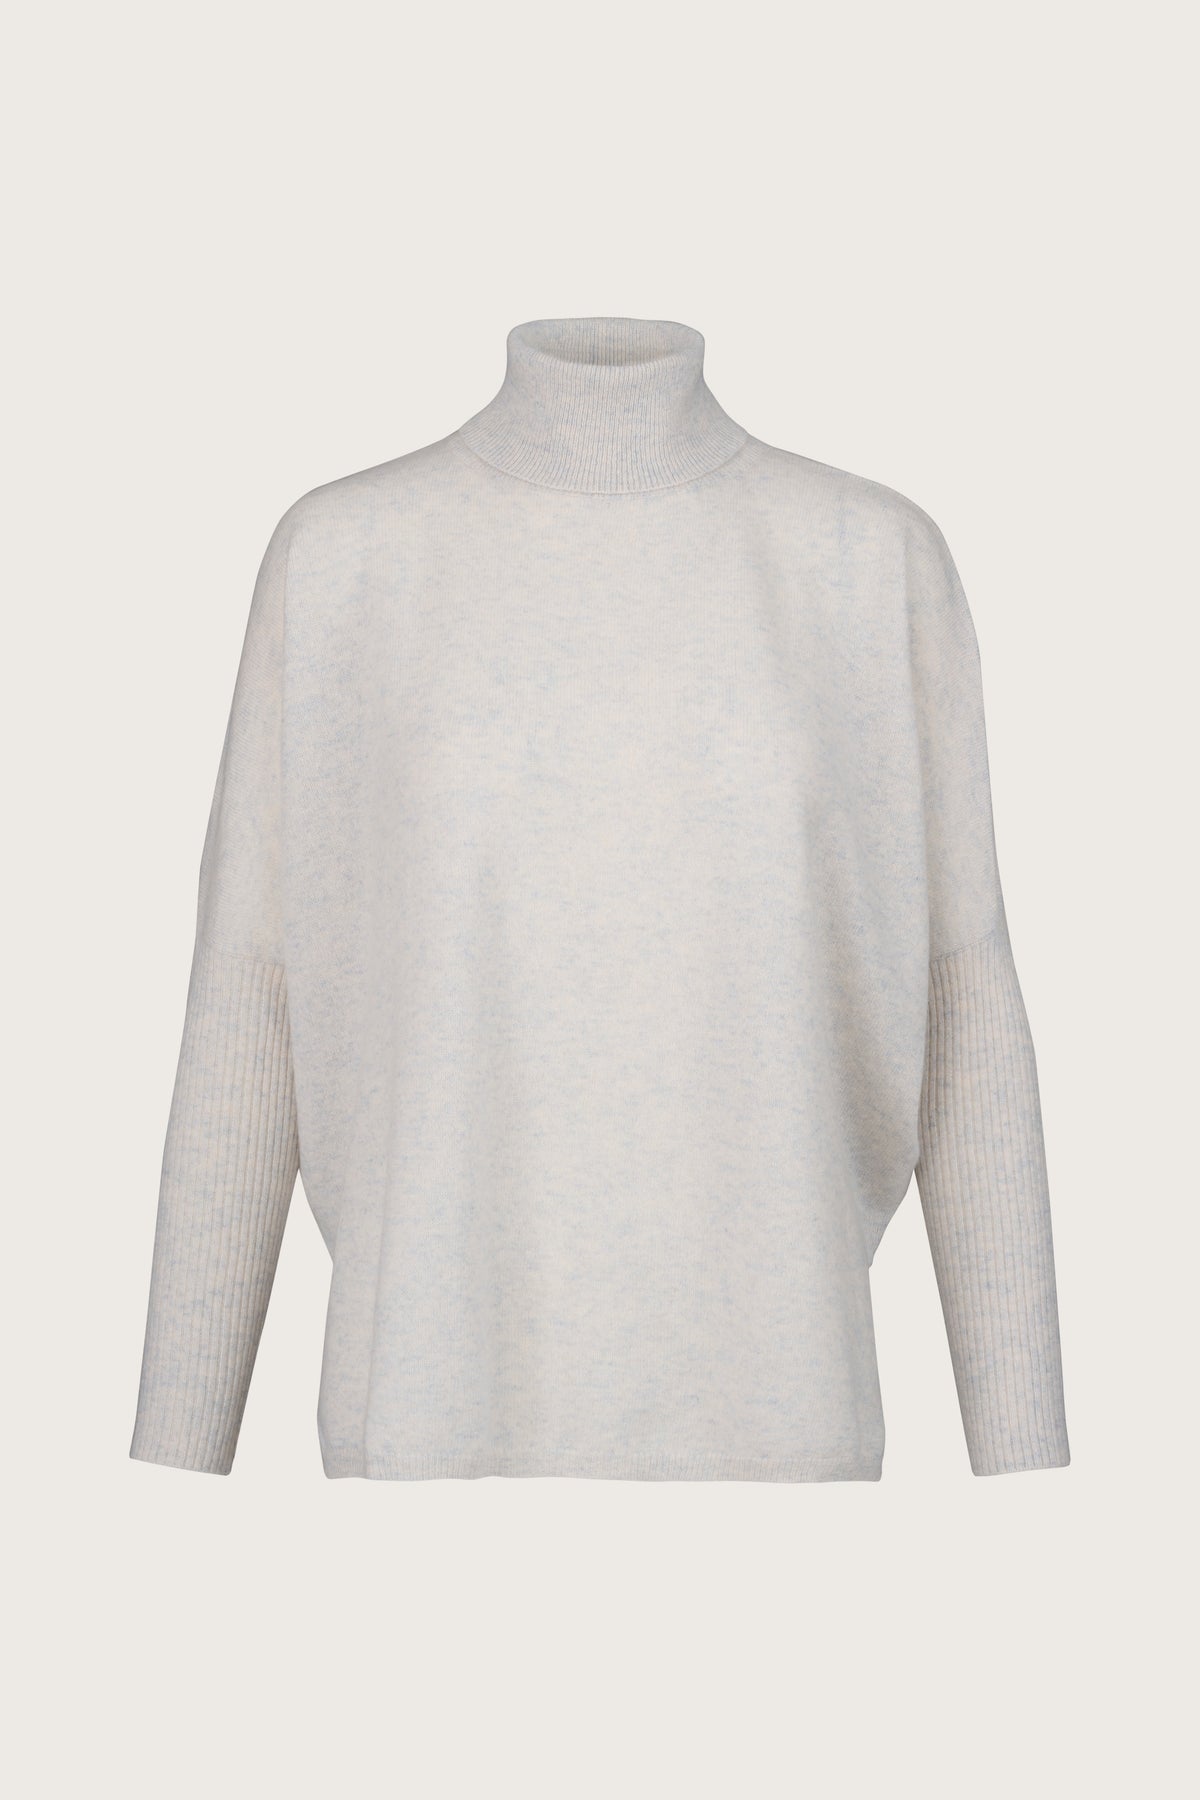 Light grey roll neck jumper with dropped shoulders and ribbed sleeves